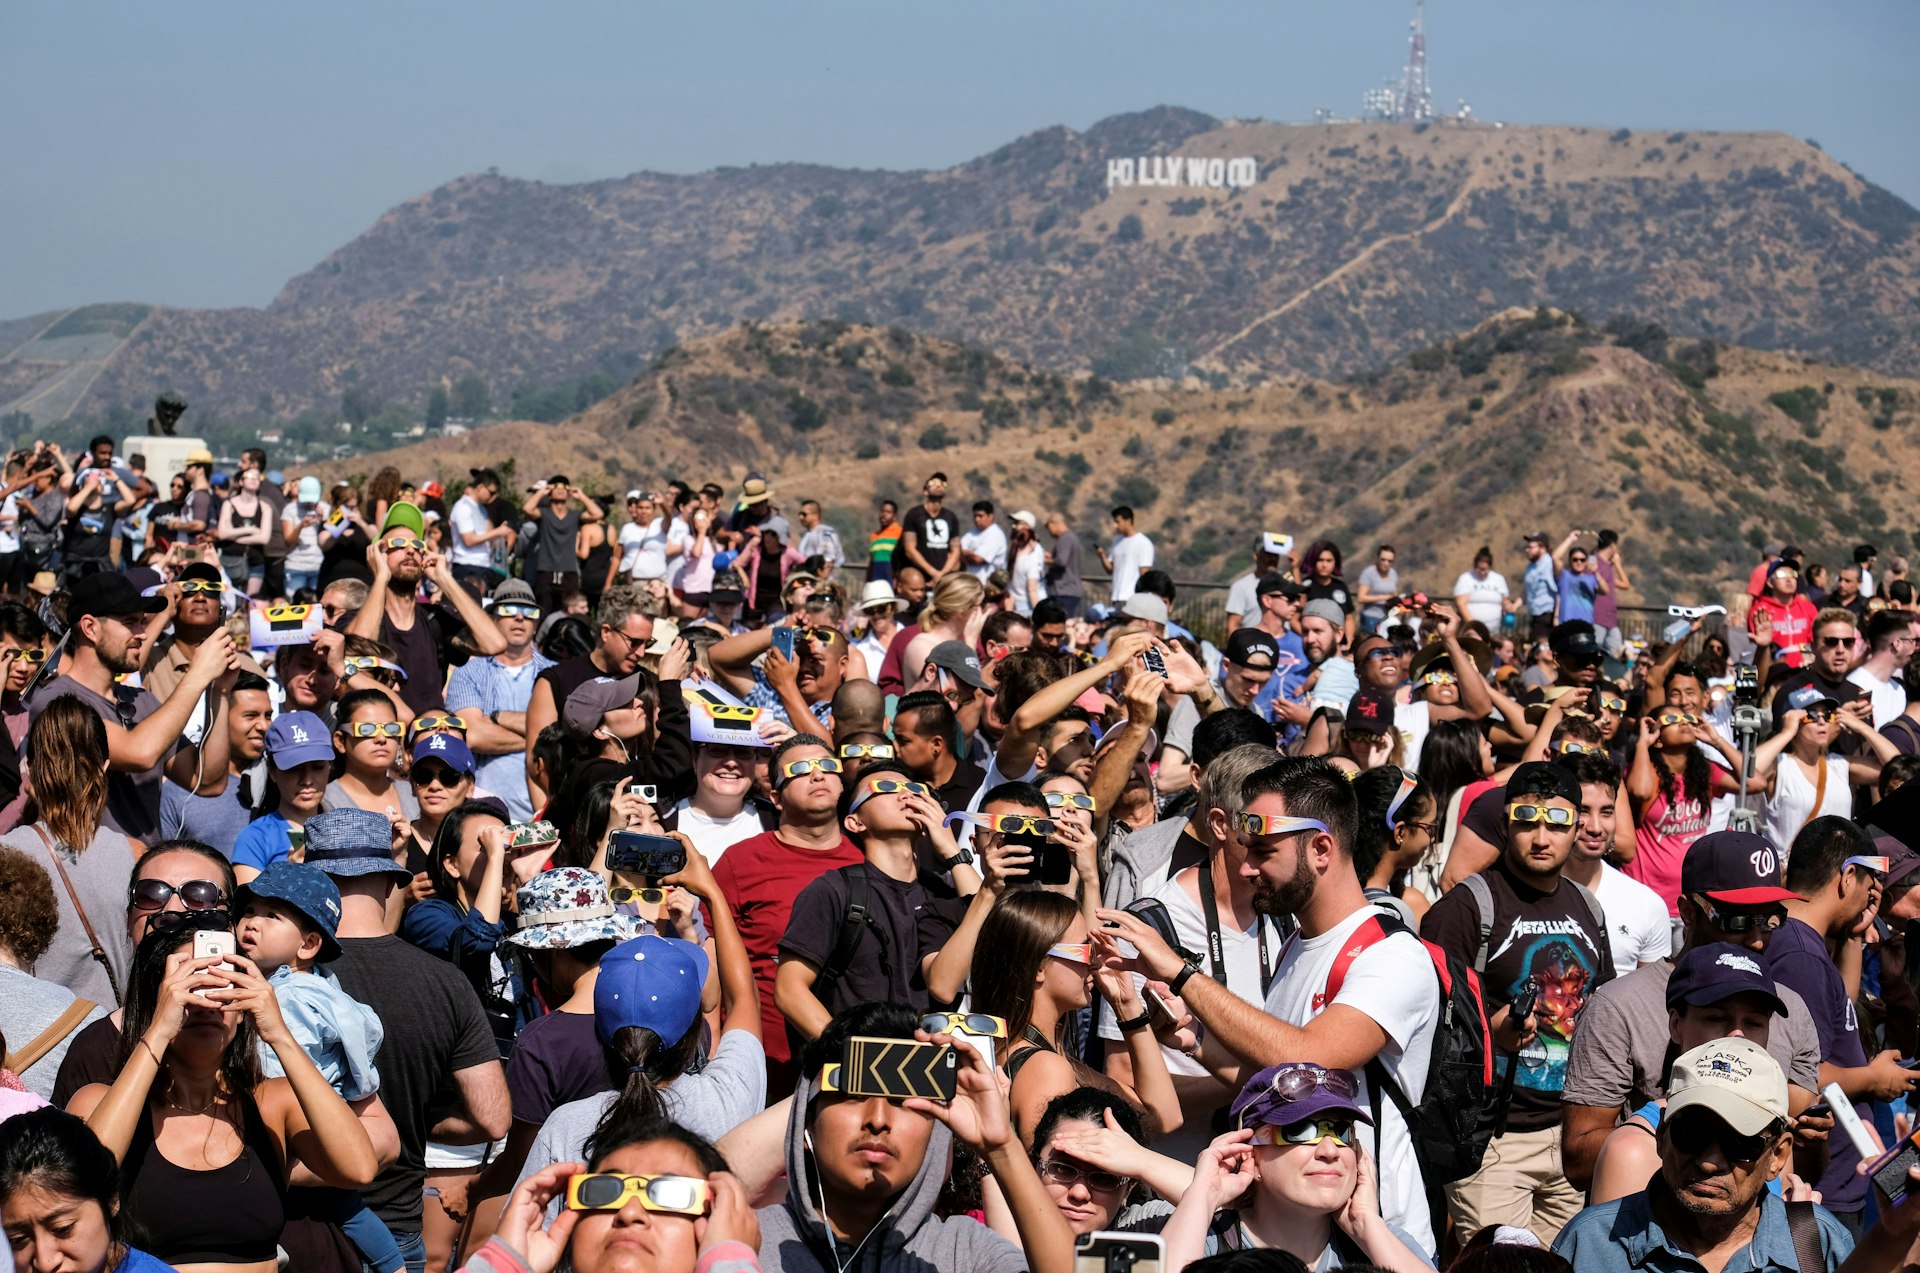 People attend a solar eclipse viewing event in 2017 at Griffith Observatory in Los Angeles, California, USA